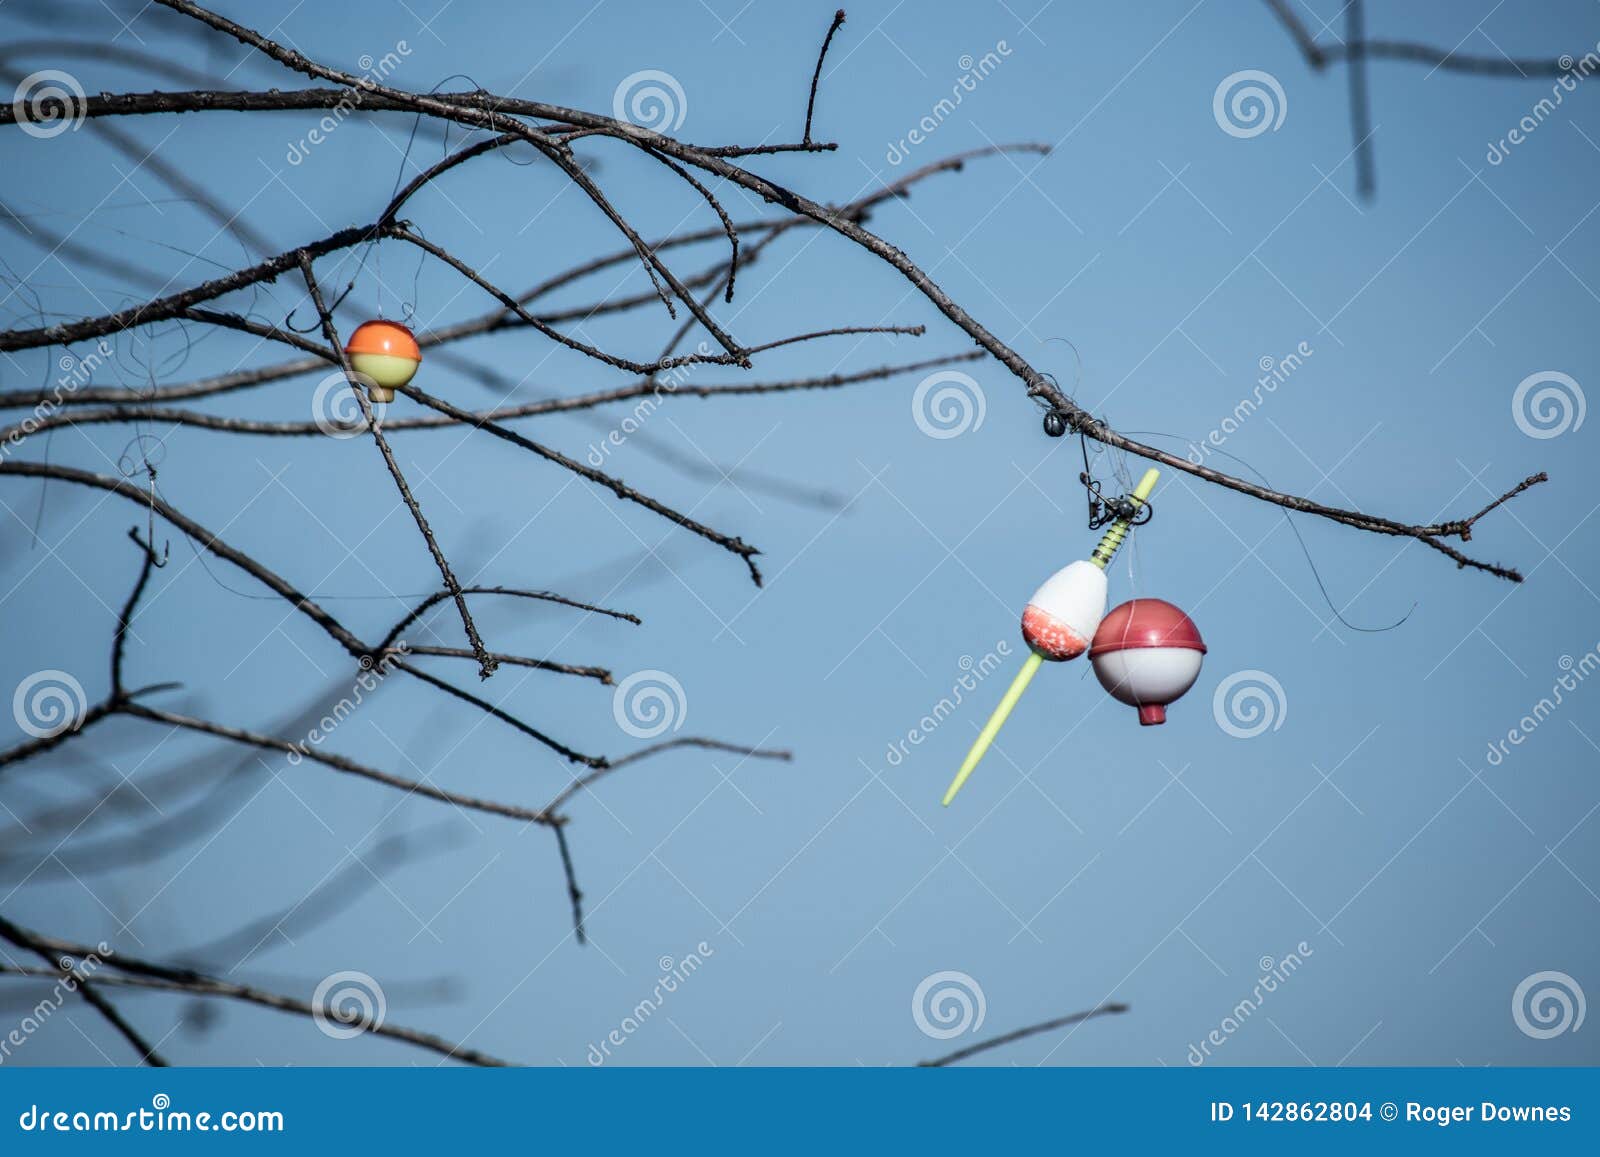 Fishing Bobbers Caught in a Tree Stock Photo - Image of tree